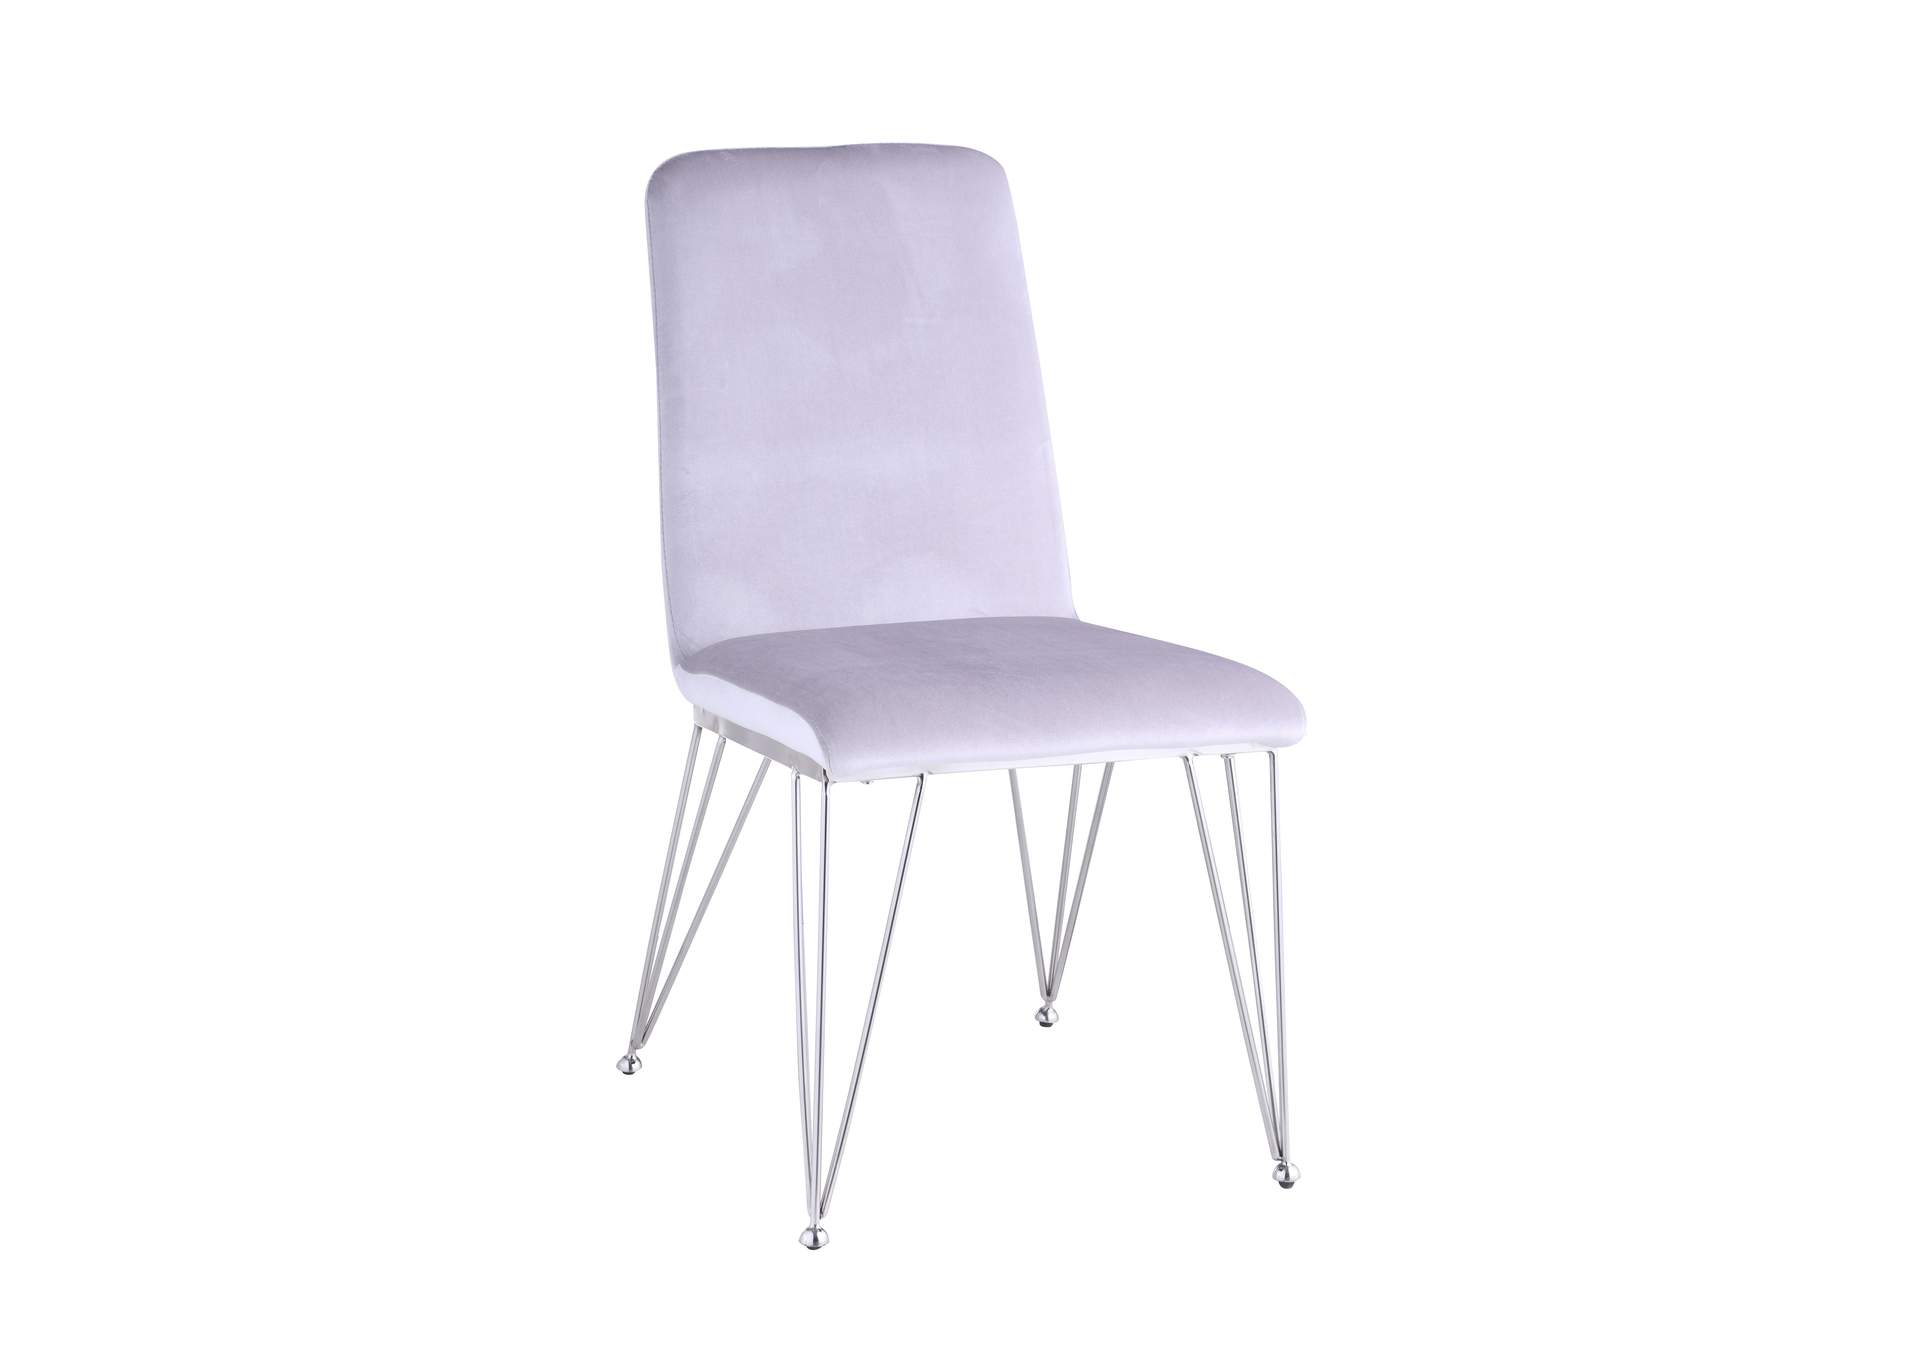 Contemporary Upholstered Side Chair,Chintaly Imports